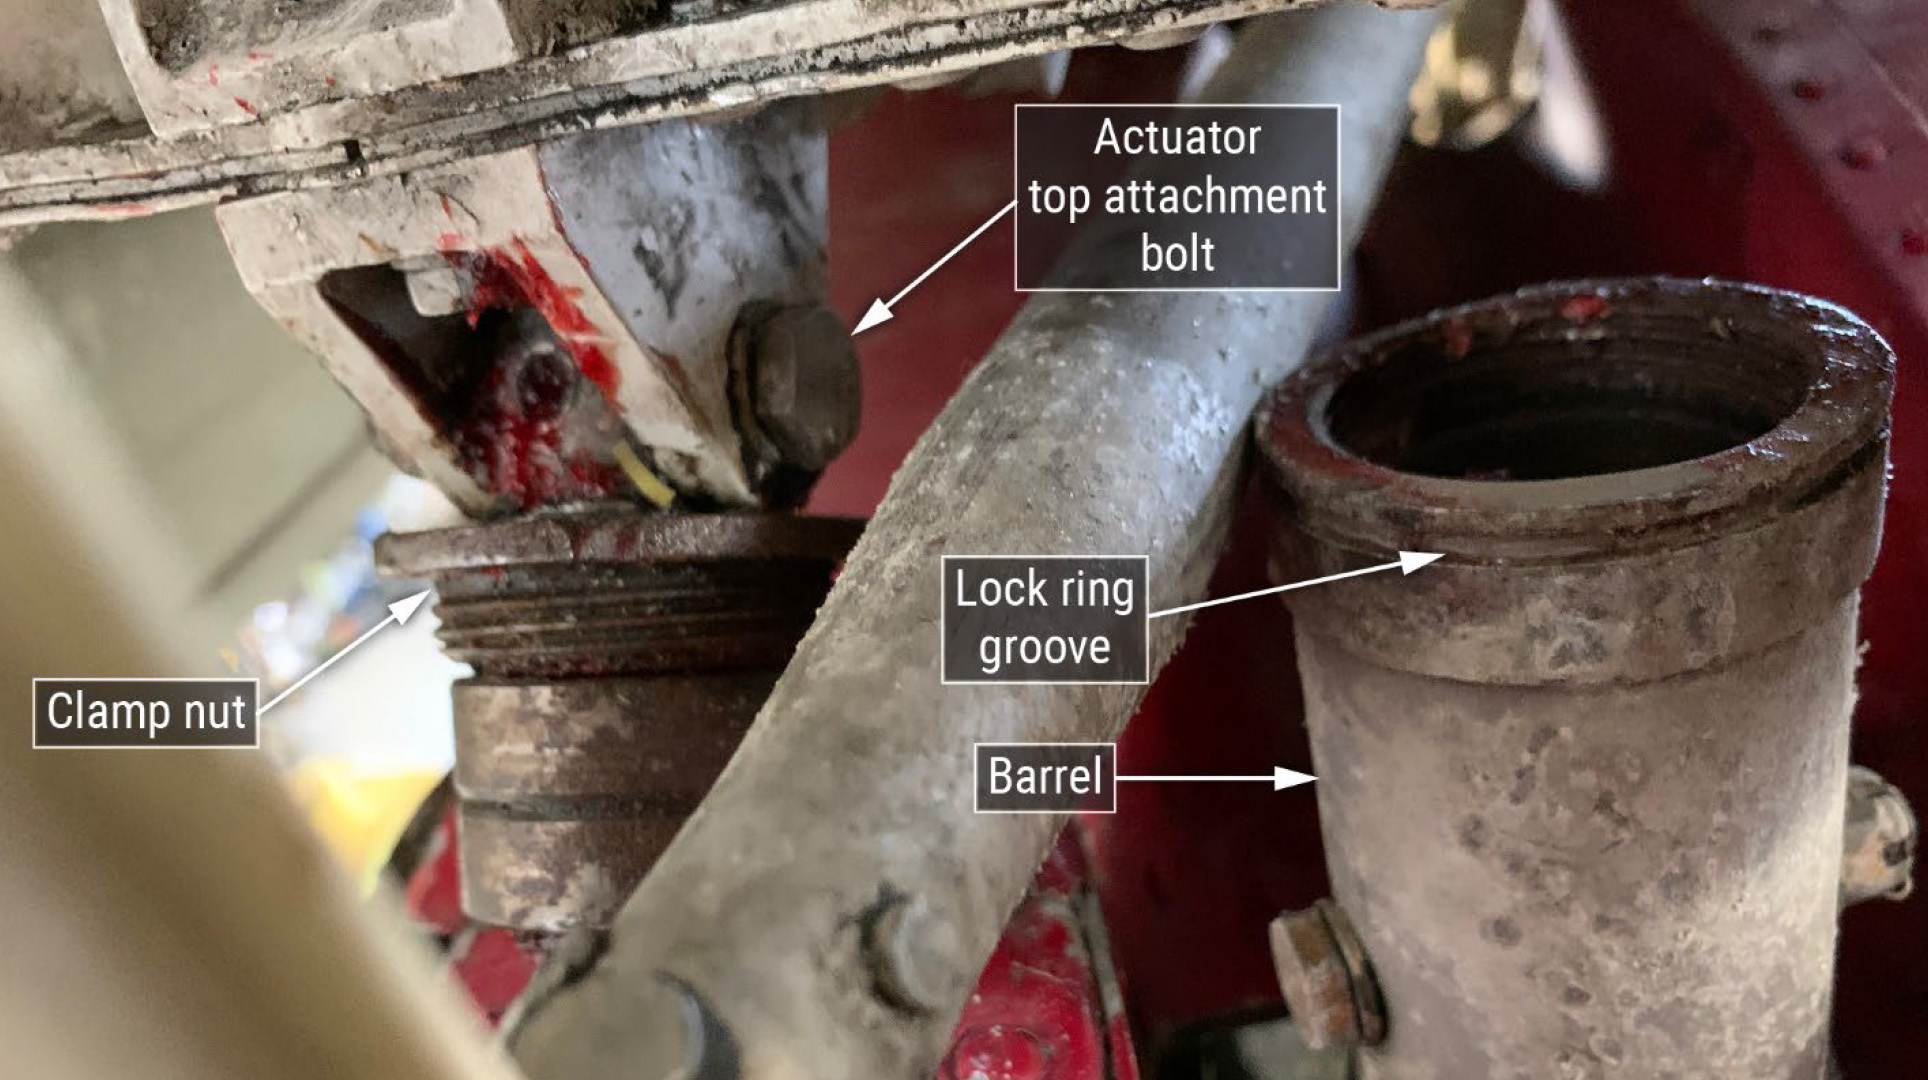 The DHC–3 wreckage was found with the clamp nut at left not seated in the barrel at right, having apparently unthreaded prior to the September 4 accident. A lock ring designed to prevent this unthreading was not found, and the manufacturer is drafting inspection guidance for the rest of the fleet. NTSB image.